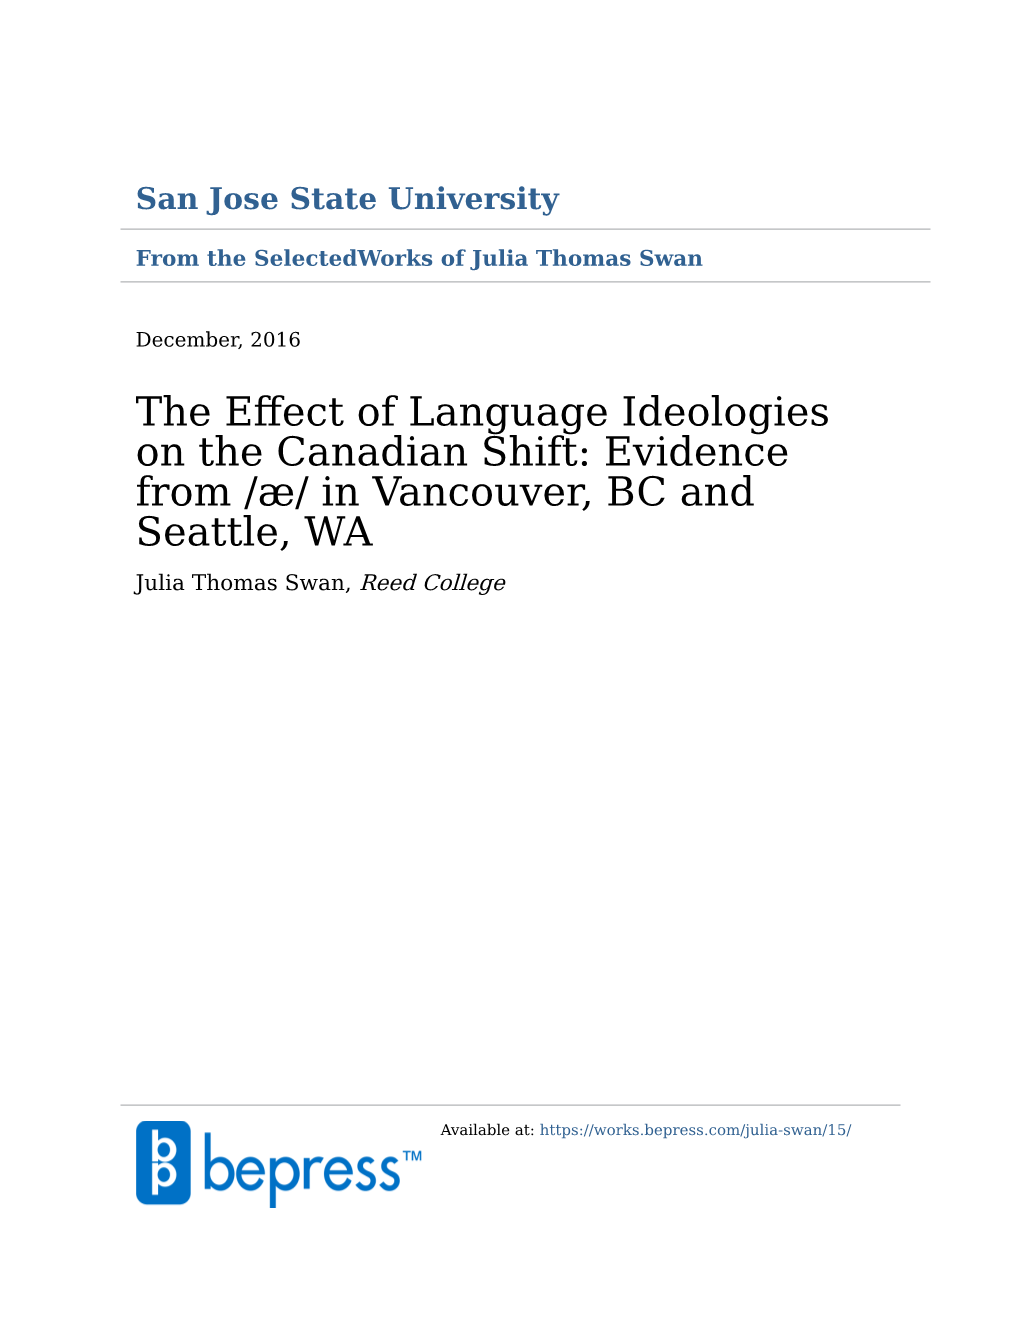 The Effect of Language Ideologies on the Canadian Shift: Evidence from /Æ/ in Vancouver, BC and Seattle, WA Julia Thomas Swan, Reed College